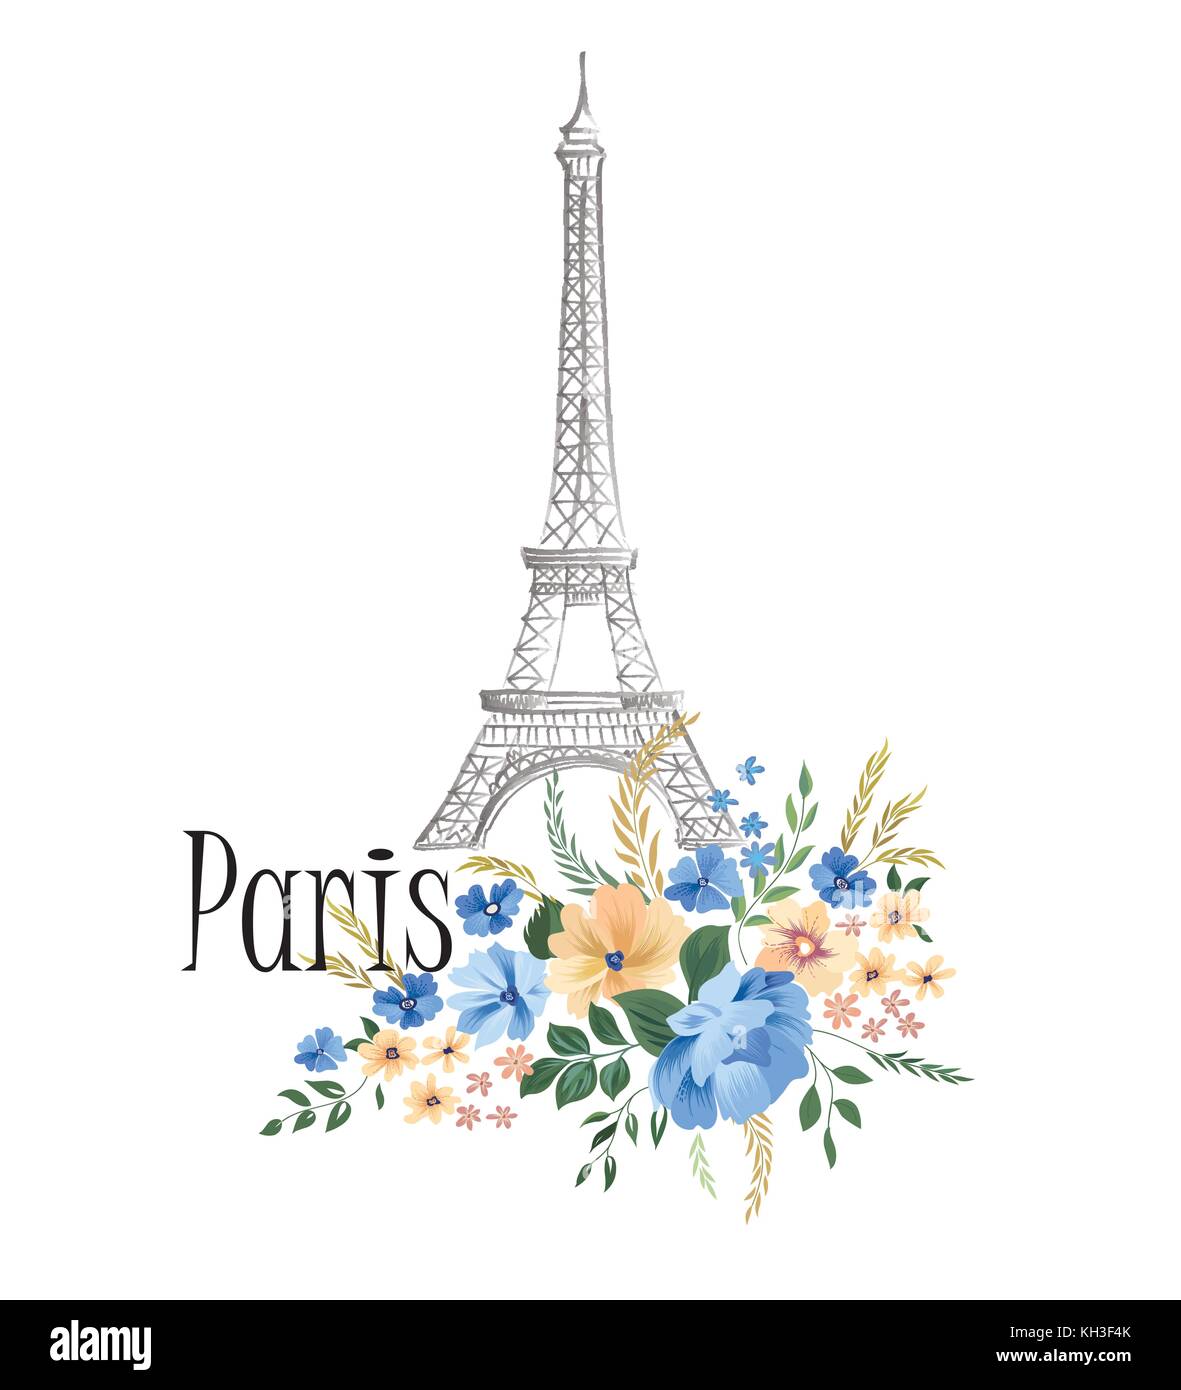 Paris background. Floral Paris sign with flower bouquet and Eiffel tower landmark. Travel France icon Stock Vector